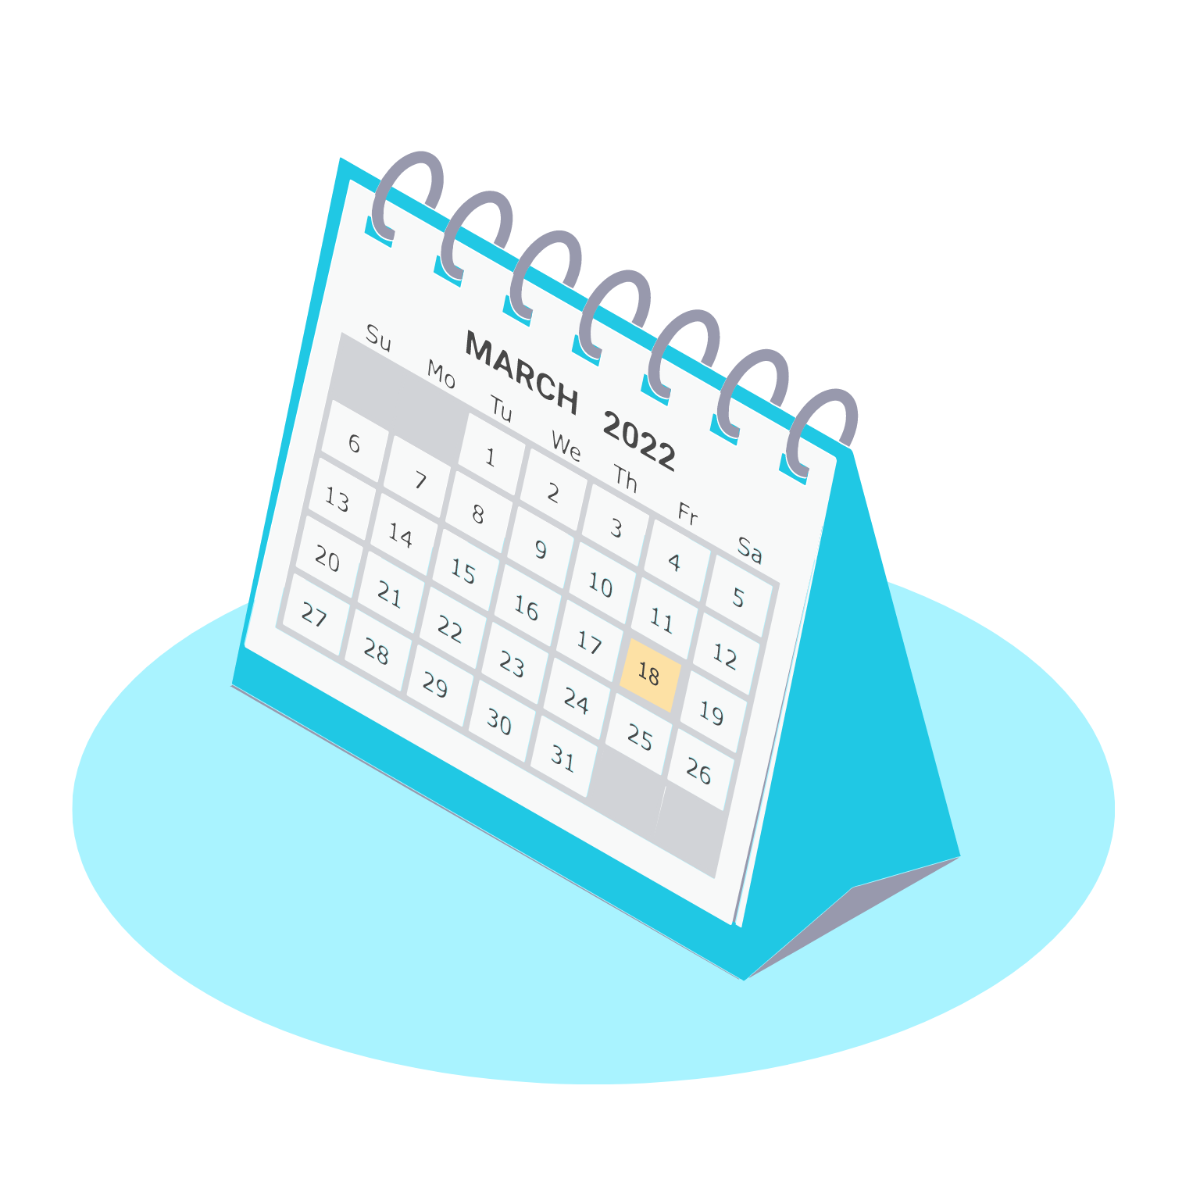 Isometric March 2022 Calendar Vector Template